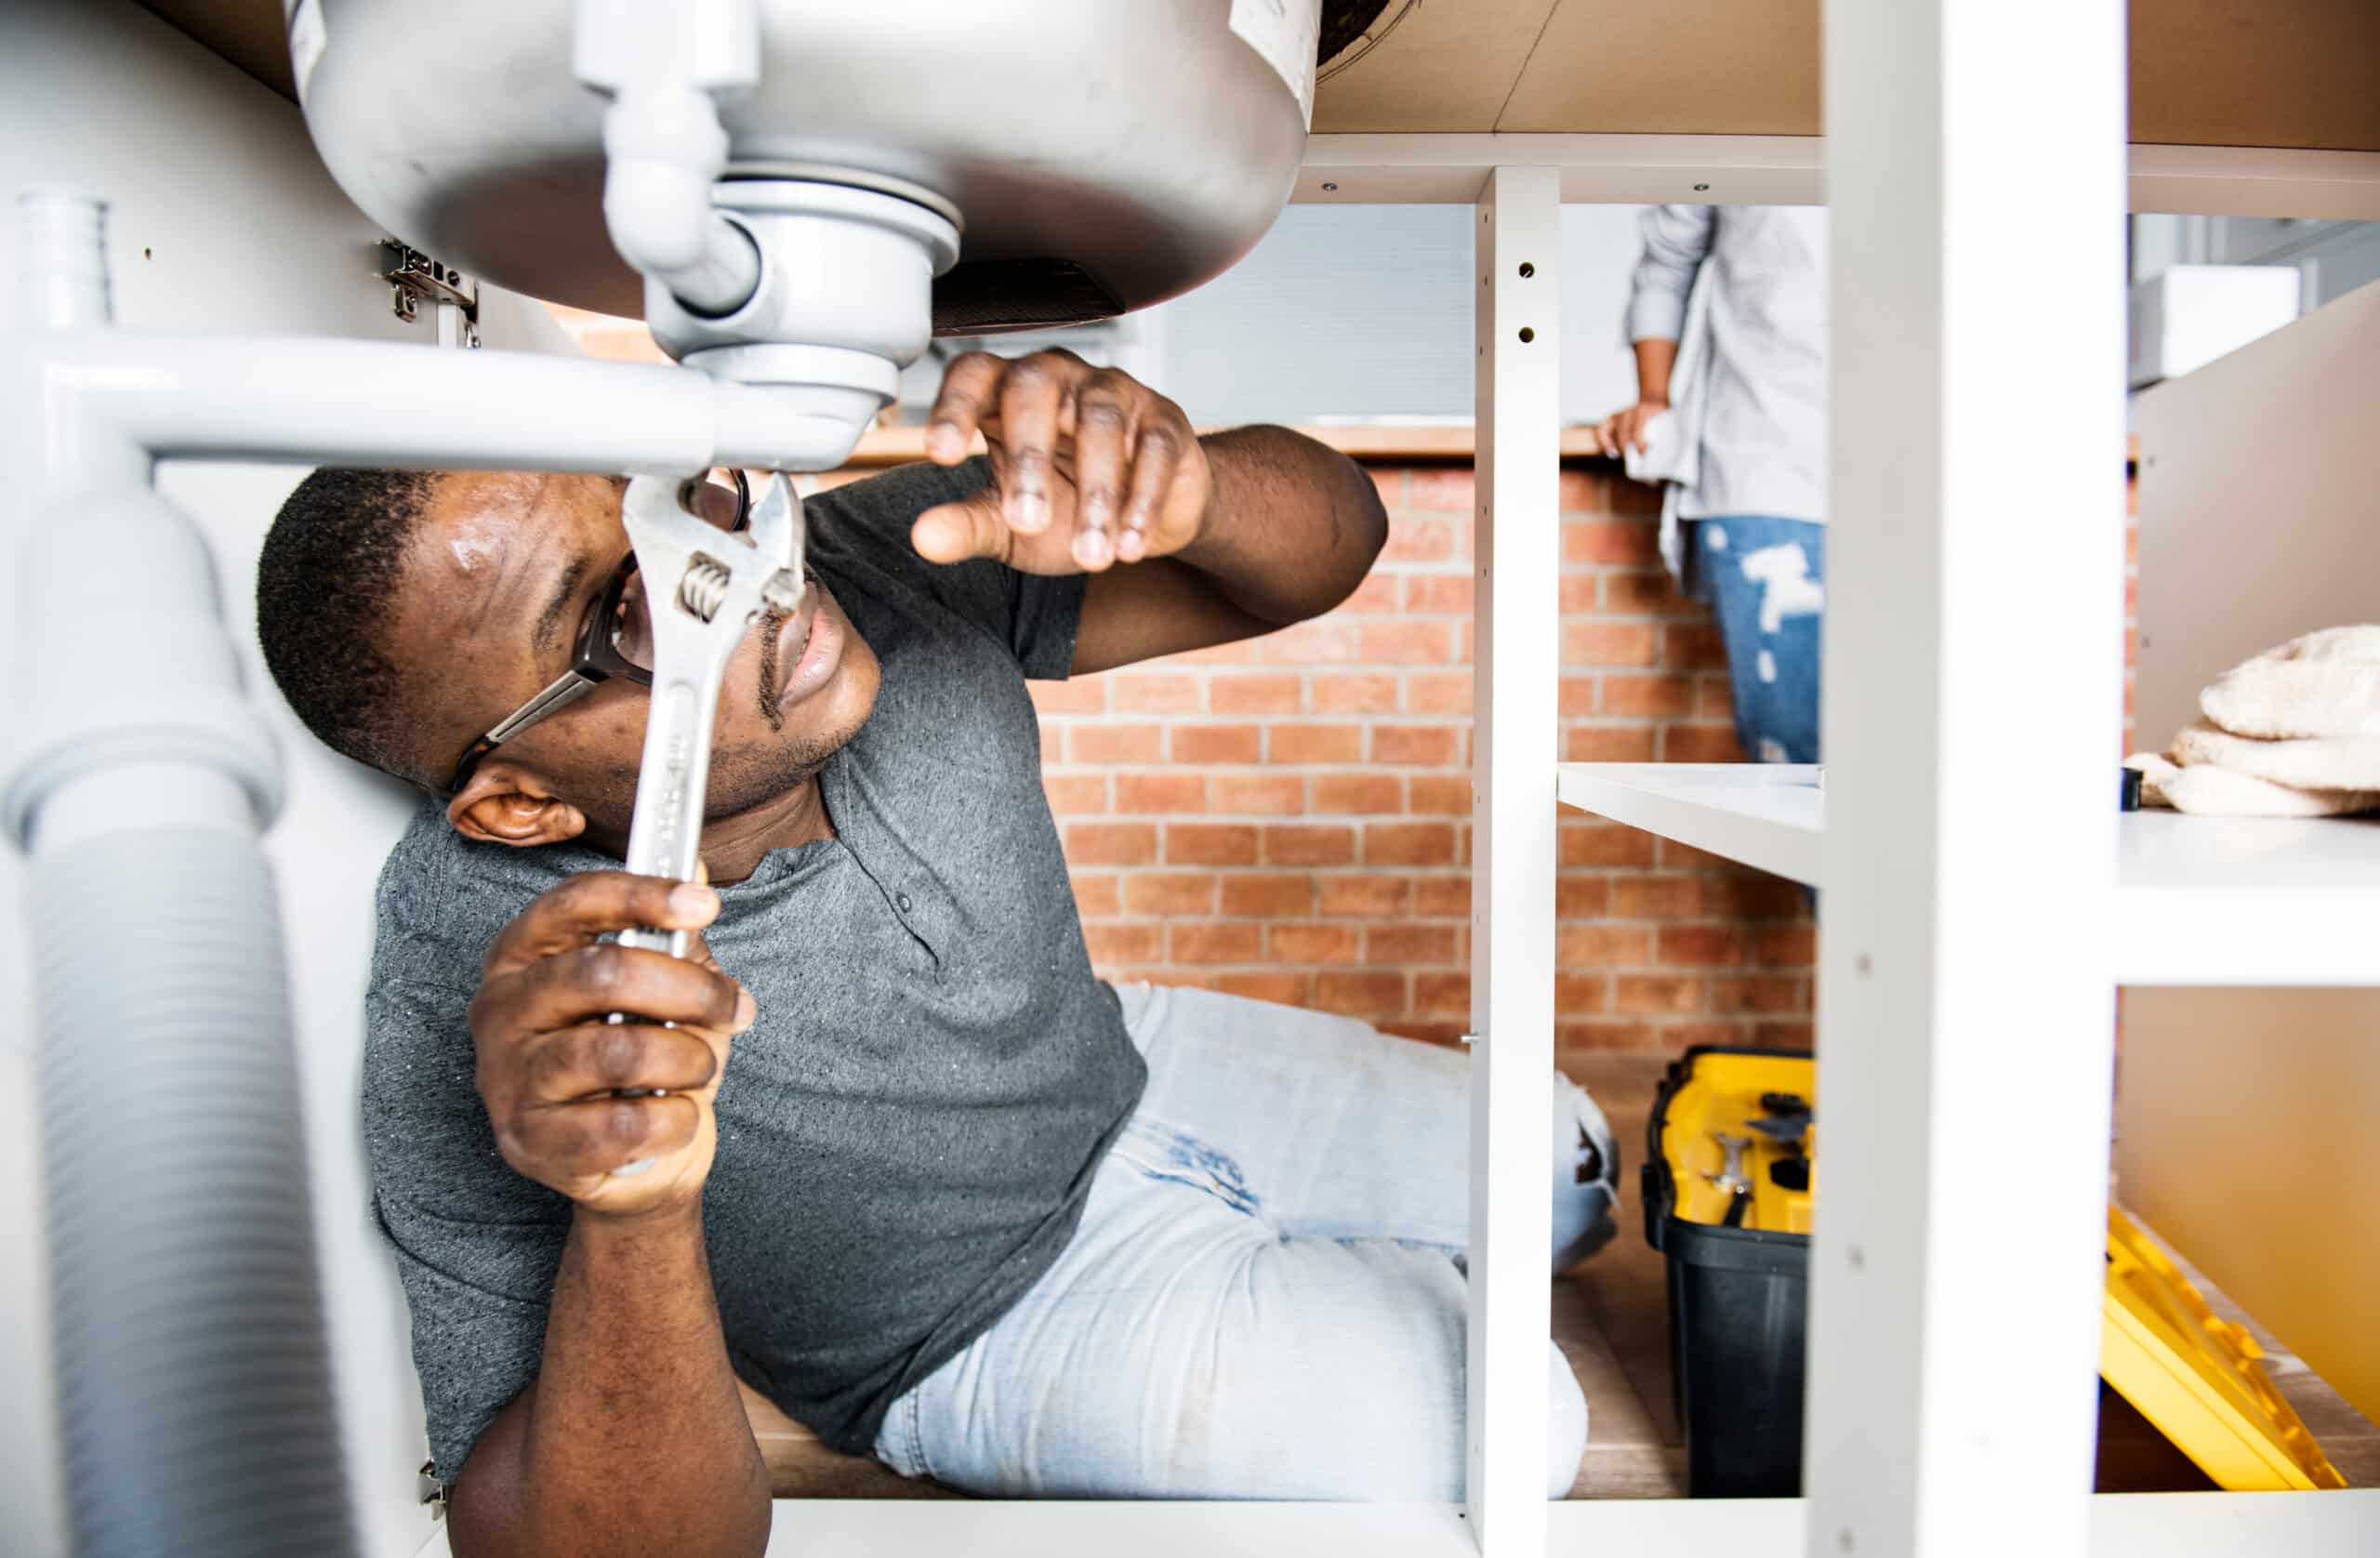 A male apprentice fixing a sink as part of a registered apprenticeship program